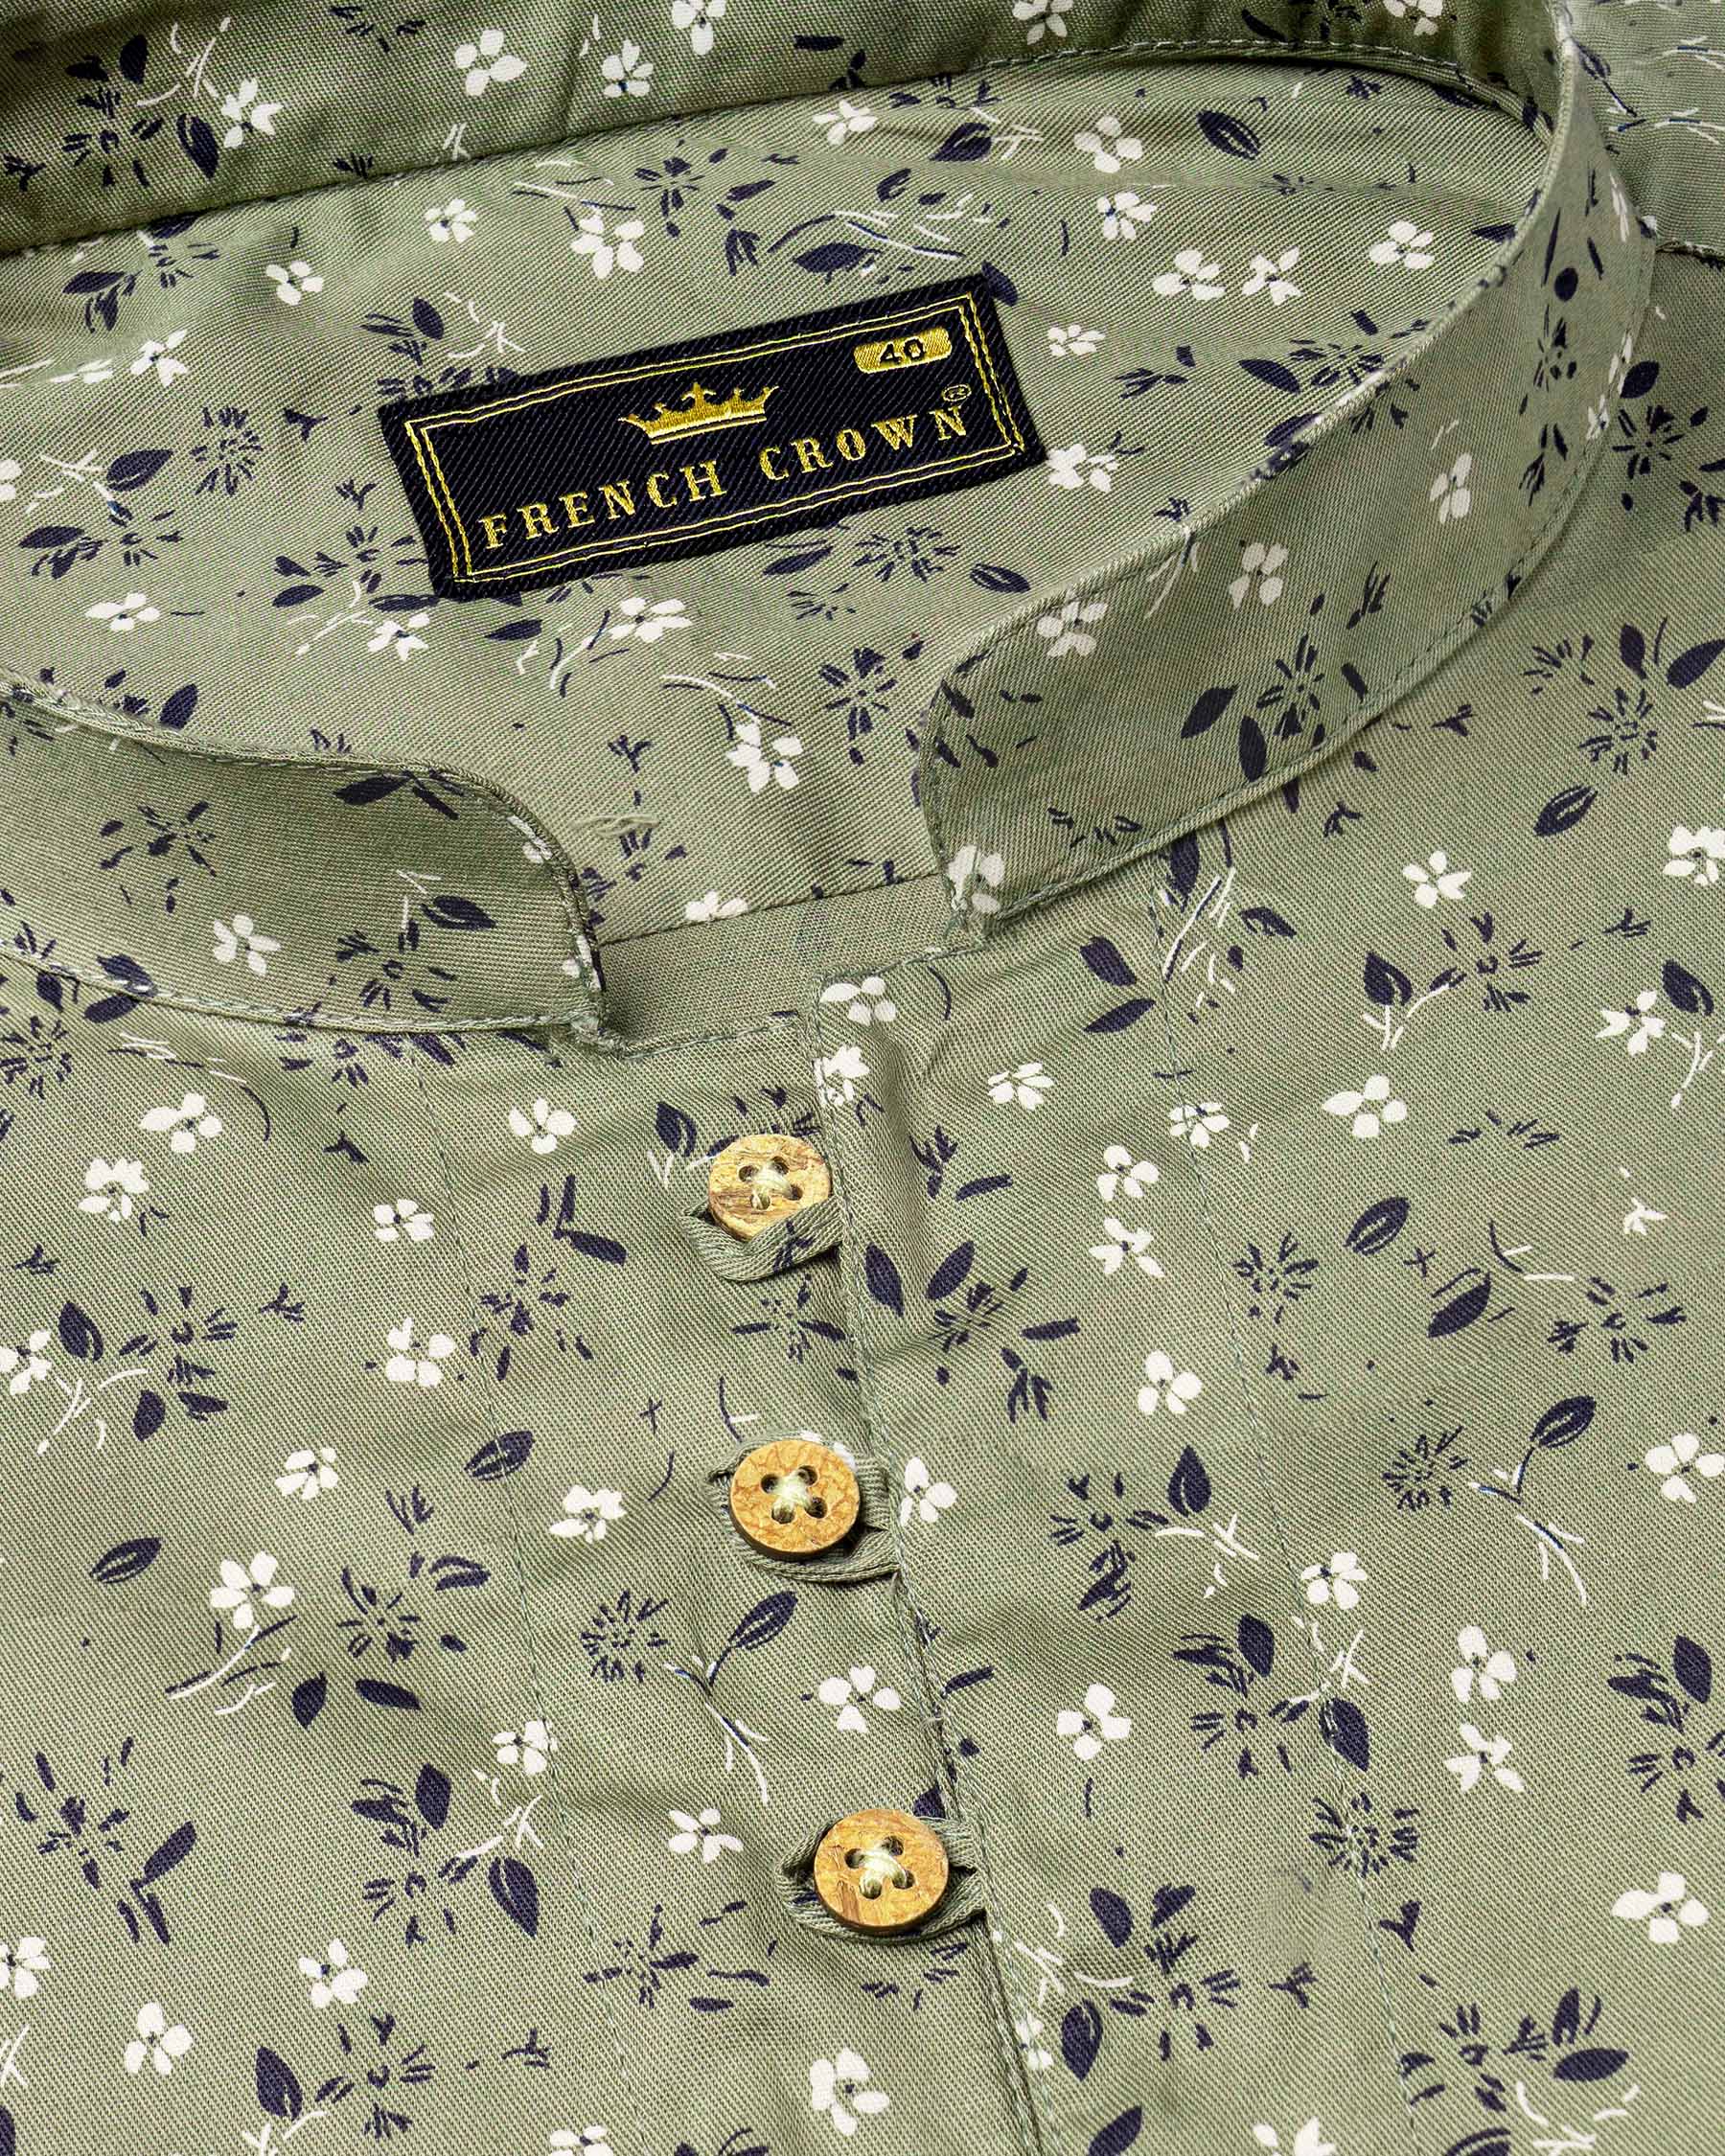 Pale Green Floral Printed Twill Premium Cotton Kurta Shirt 6950-KS-38,6950-KS-H-38,6950-KS-39,6950-KS-H-39,6950-KS-40,6950-KS-H-40,6950-KS-42,6950-KS-H-42,6950-KS-44,6950-KS-H-44,6950-KS-46,6950-KS-H-46,6950-KS-48,6950-KS-H-48,6950-KS-50,6950-KS-H-50,6950-KS-52,6950-KS-H-52